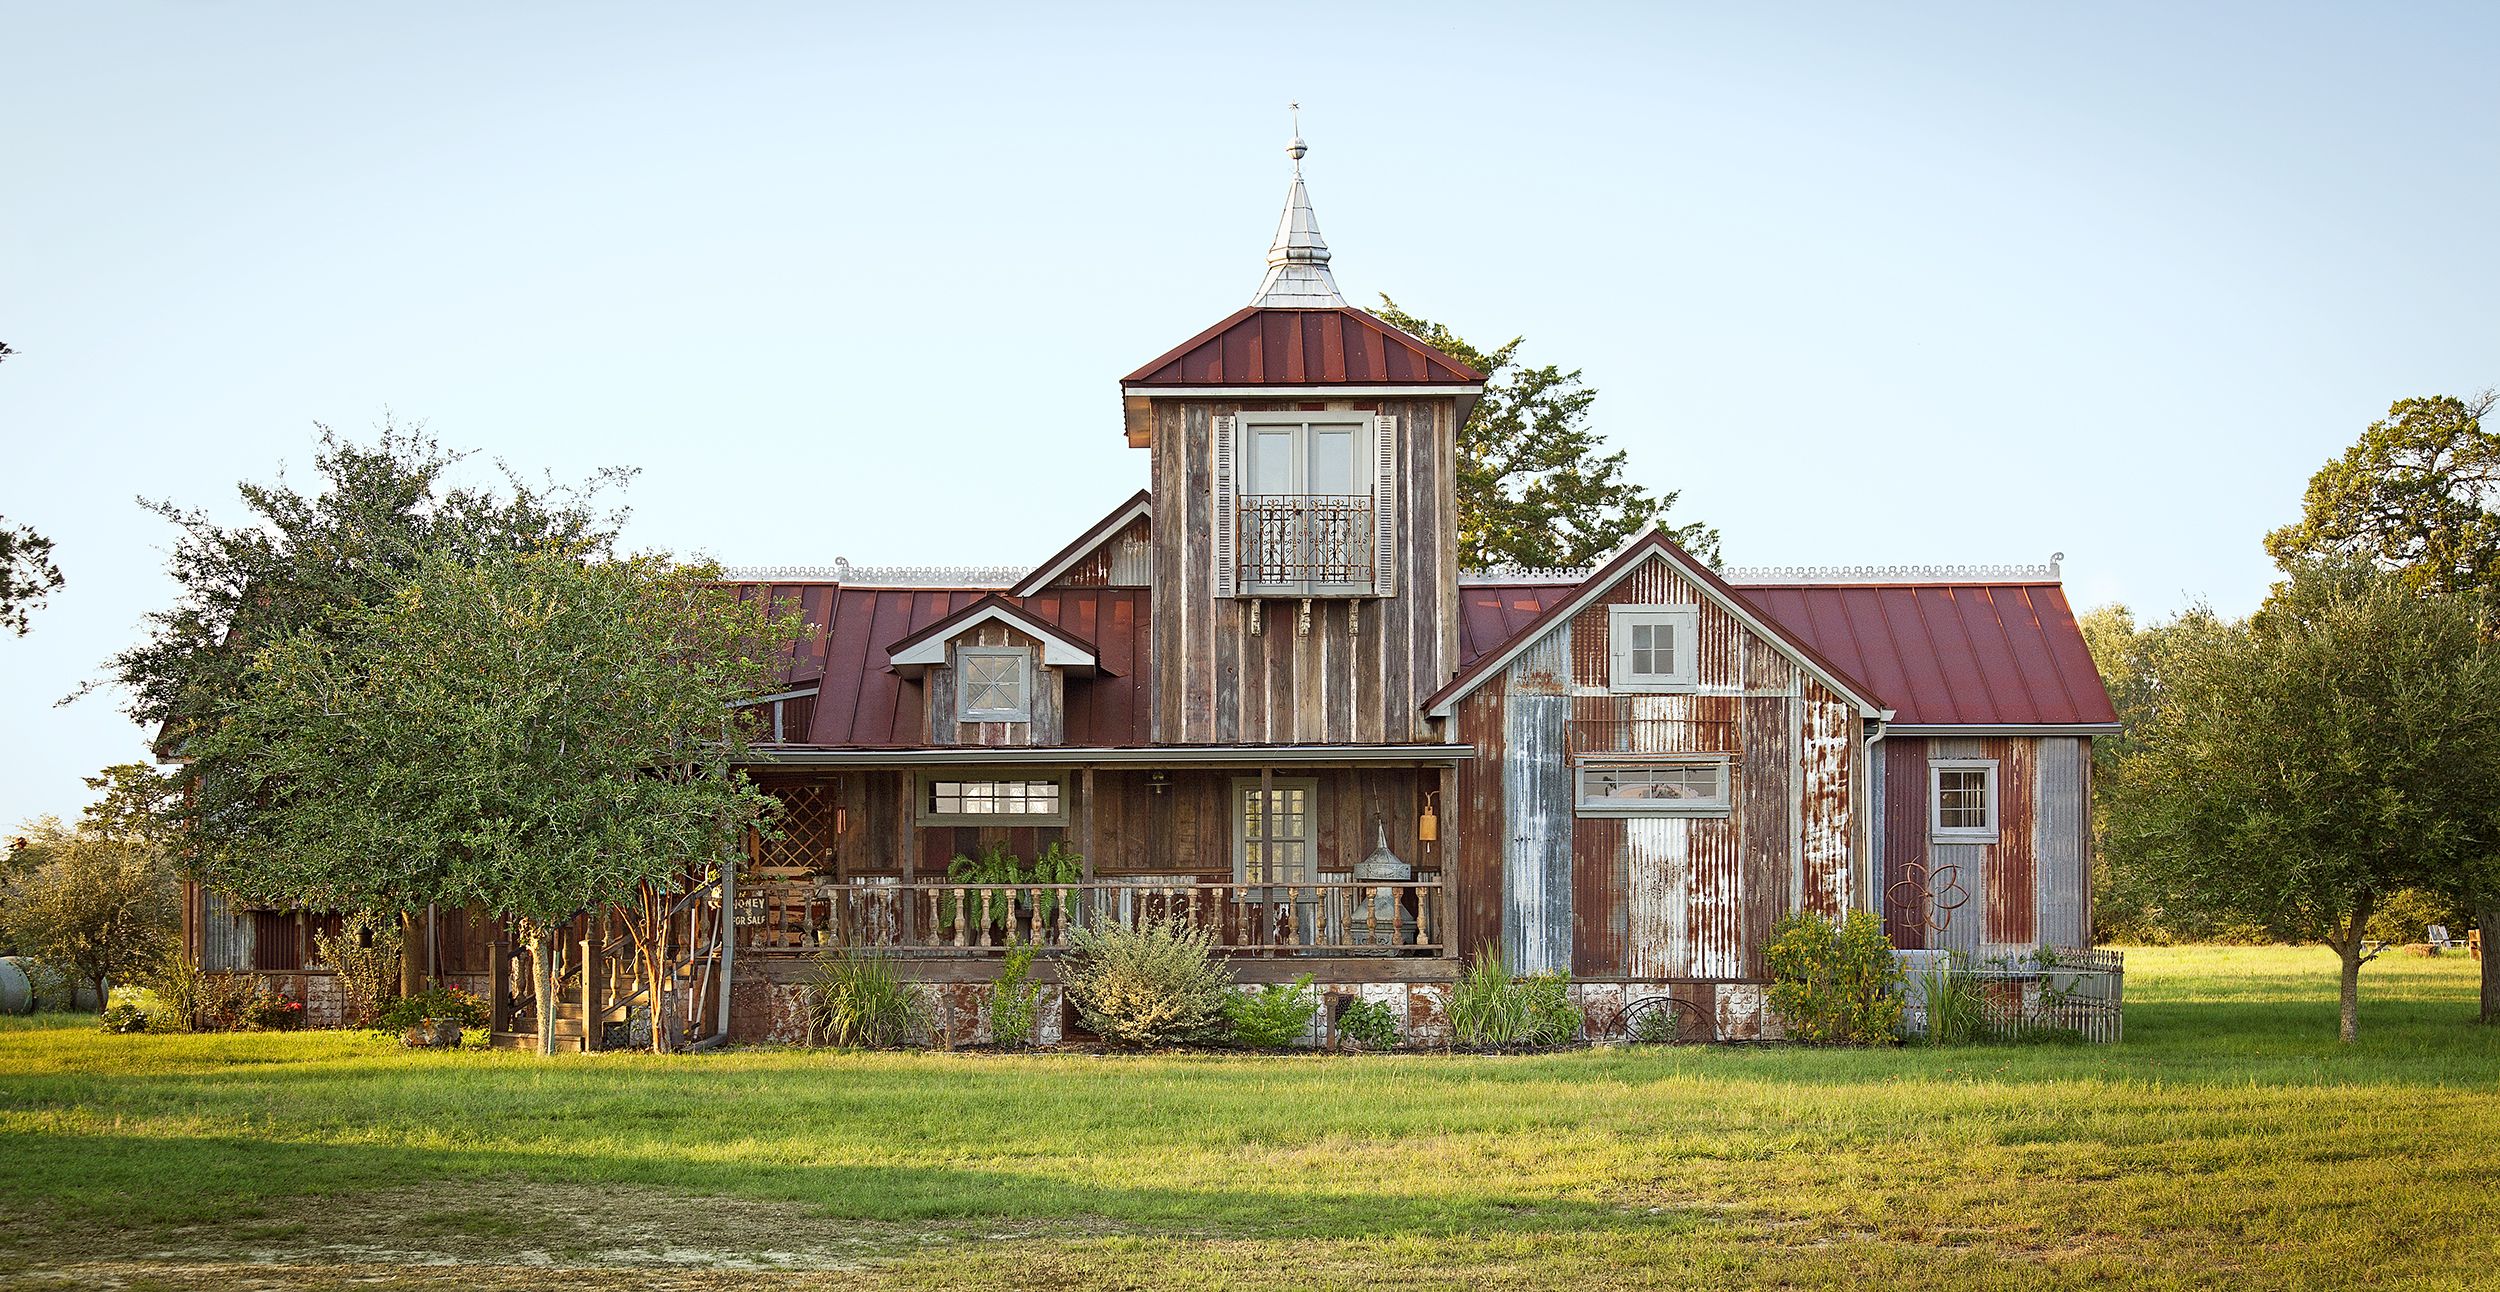 This Rustic Farmhouse Was Built And Decorated Using Almost